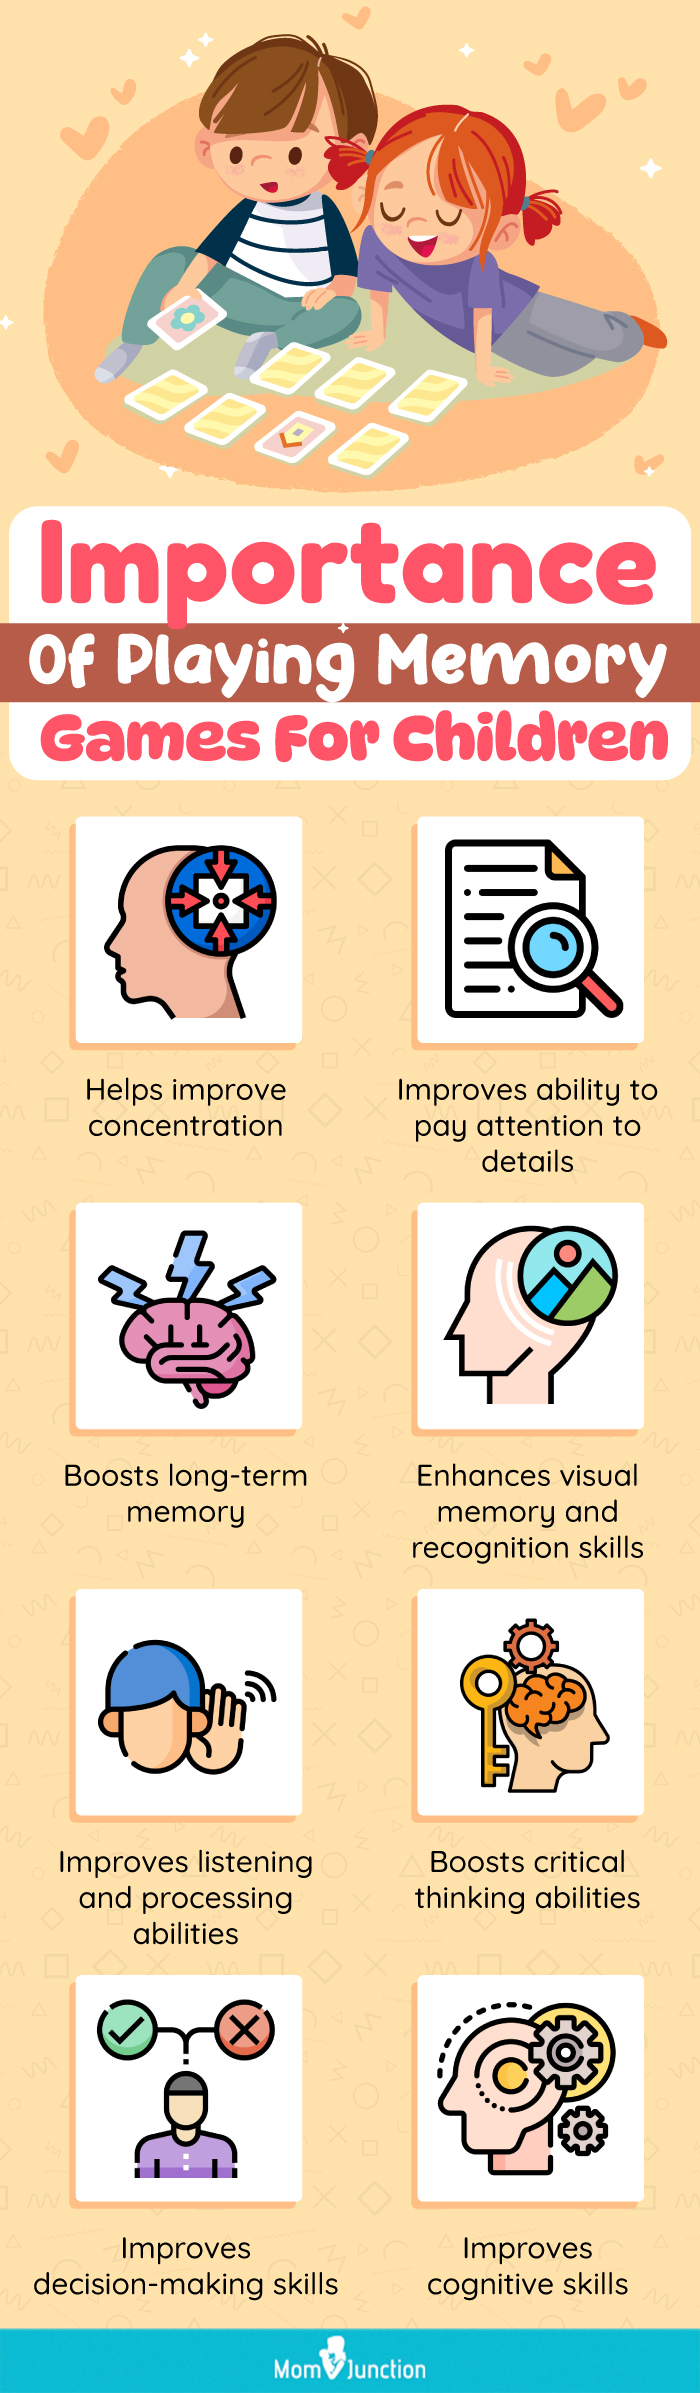  importance of playing memory games for children(infographic)